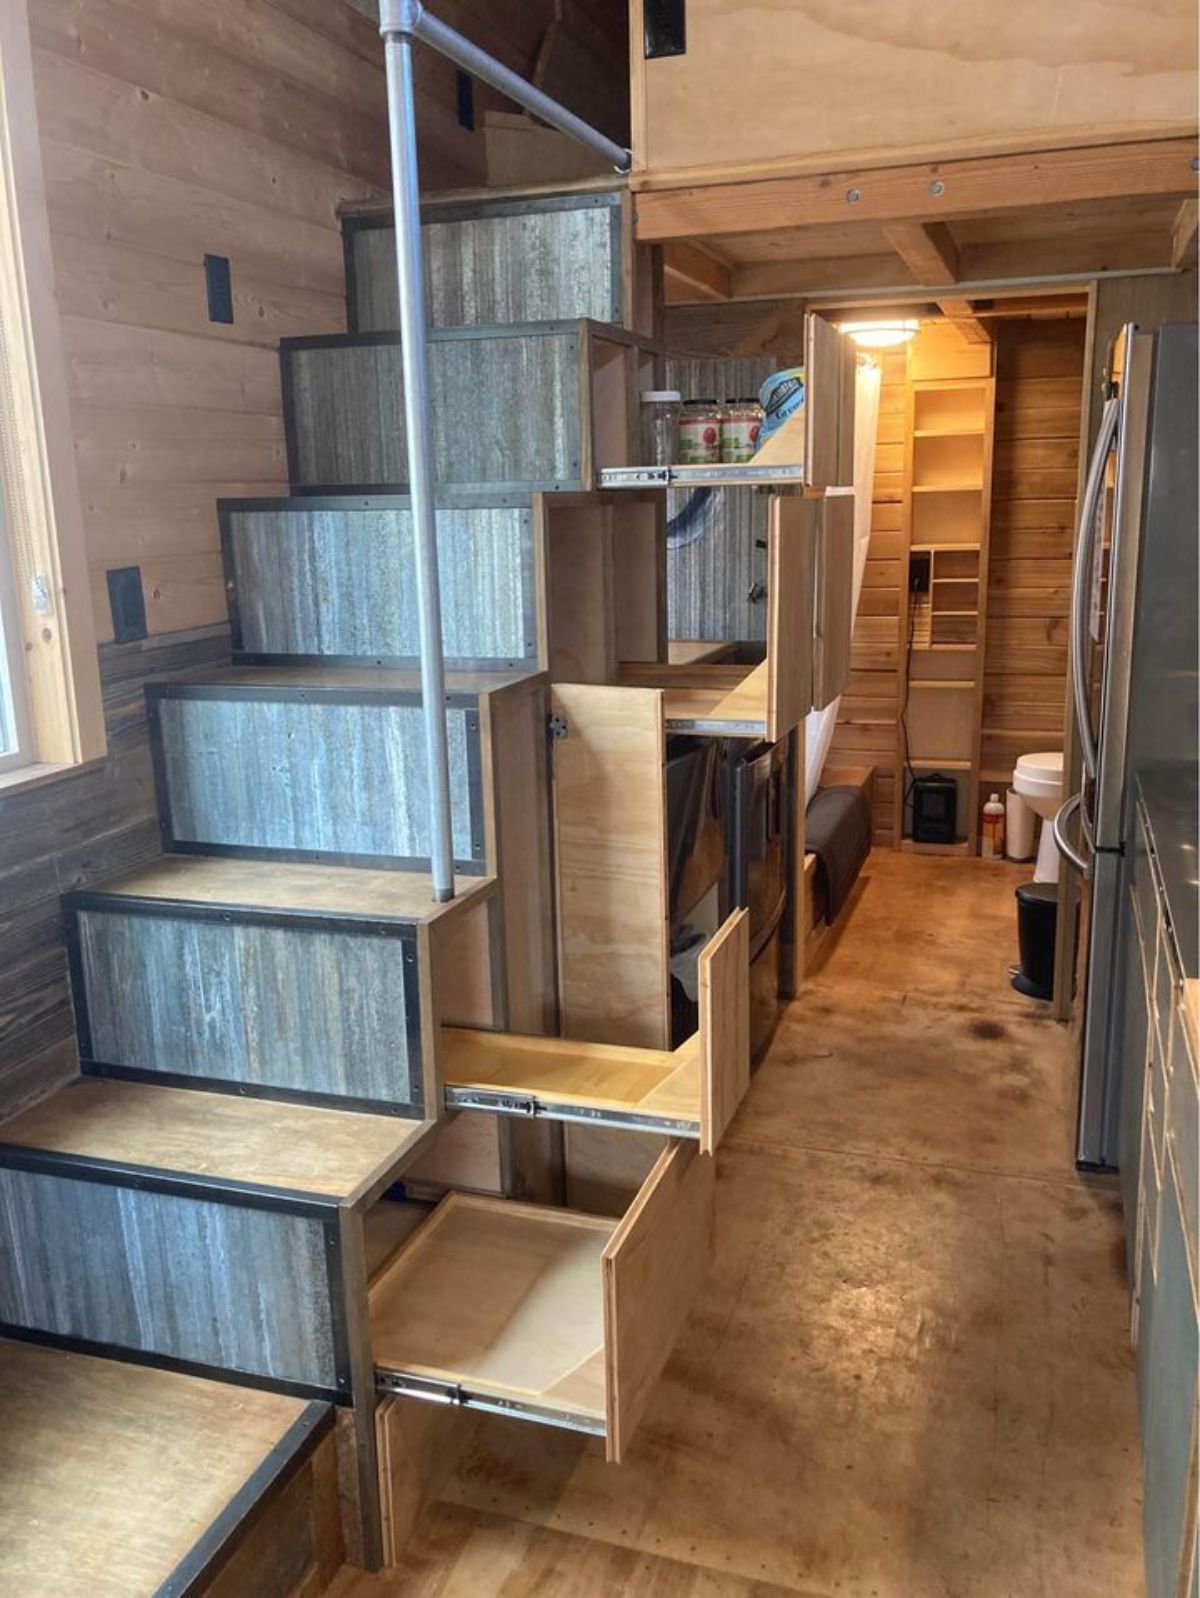 Stairs leading to main bedroom has a lots of storage under each steps plus it has an oven and refrigerator on the opposite side